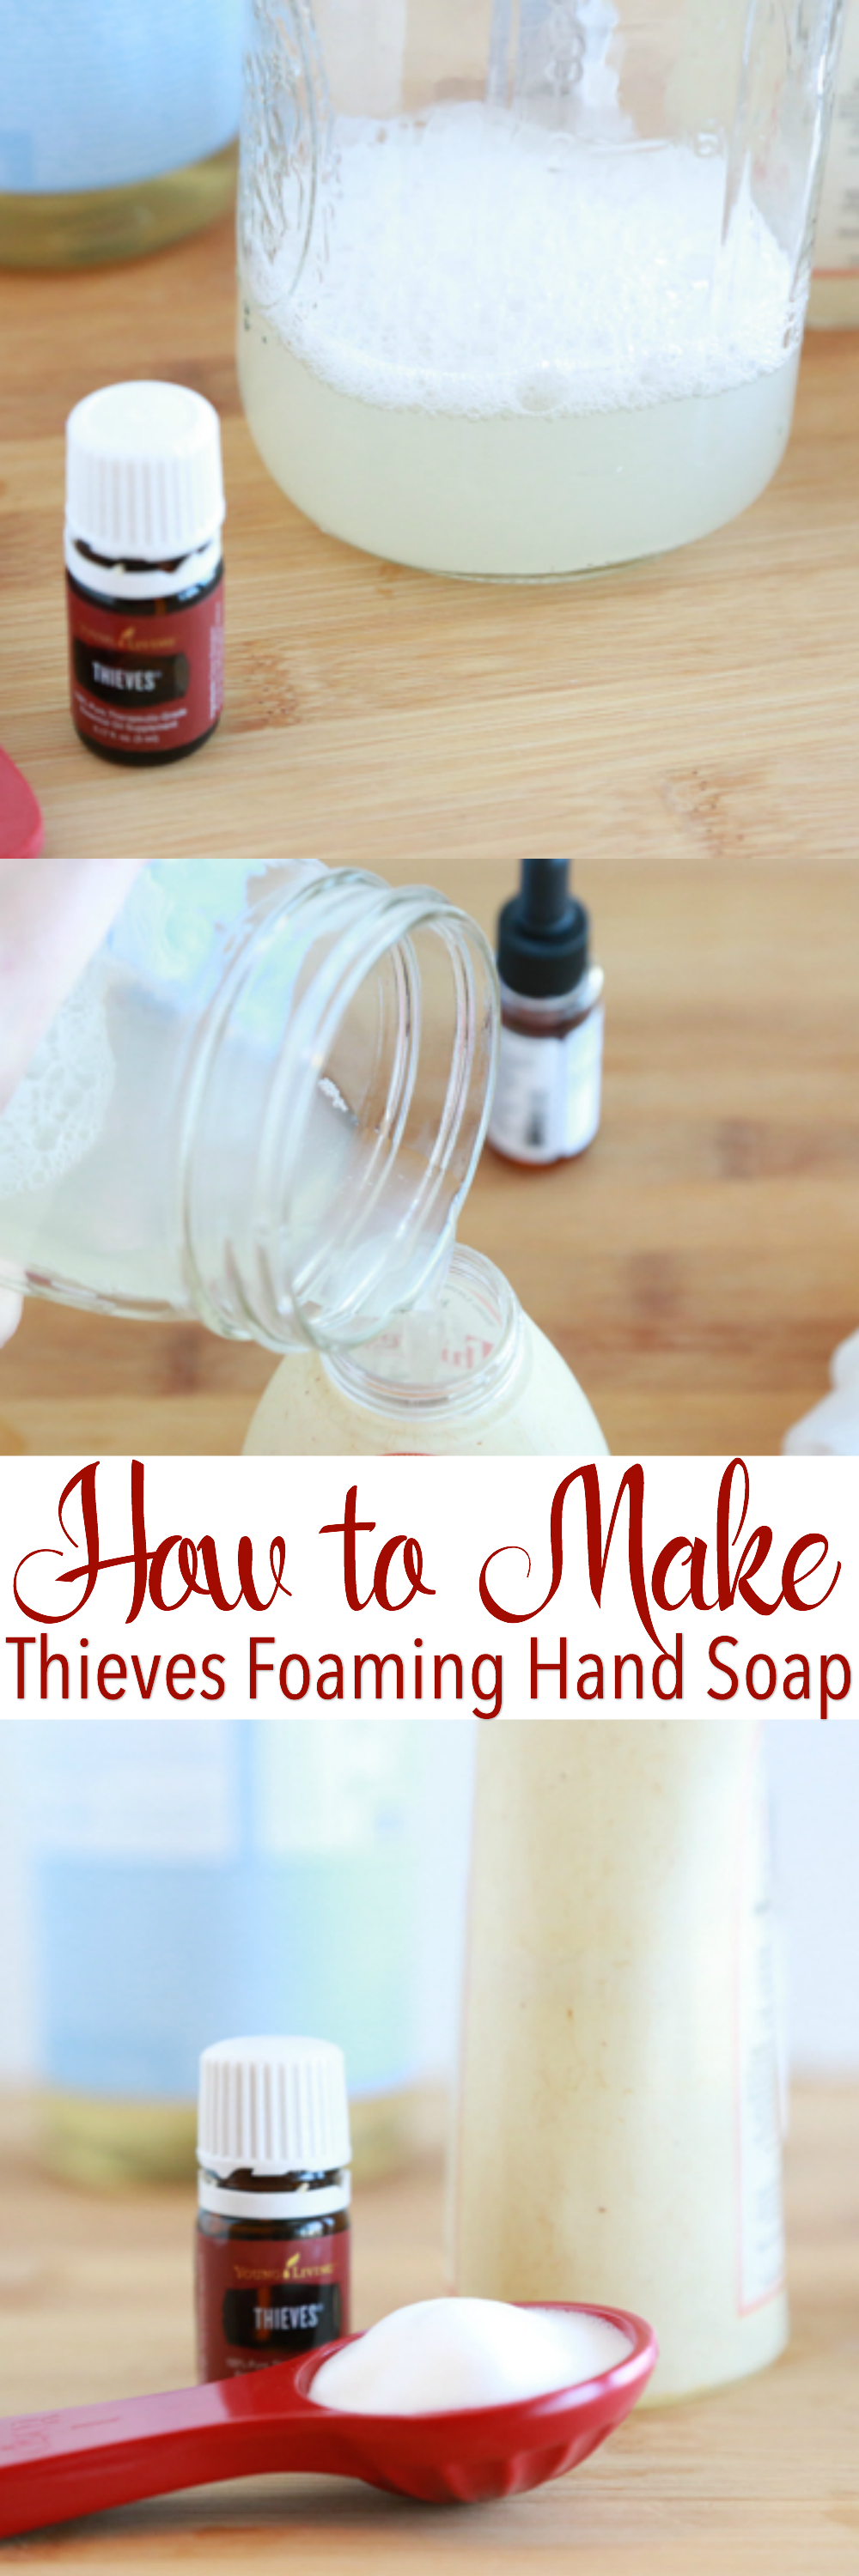 Learn how to make Thieves Foaming Hand Soap